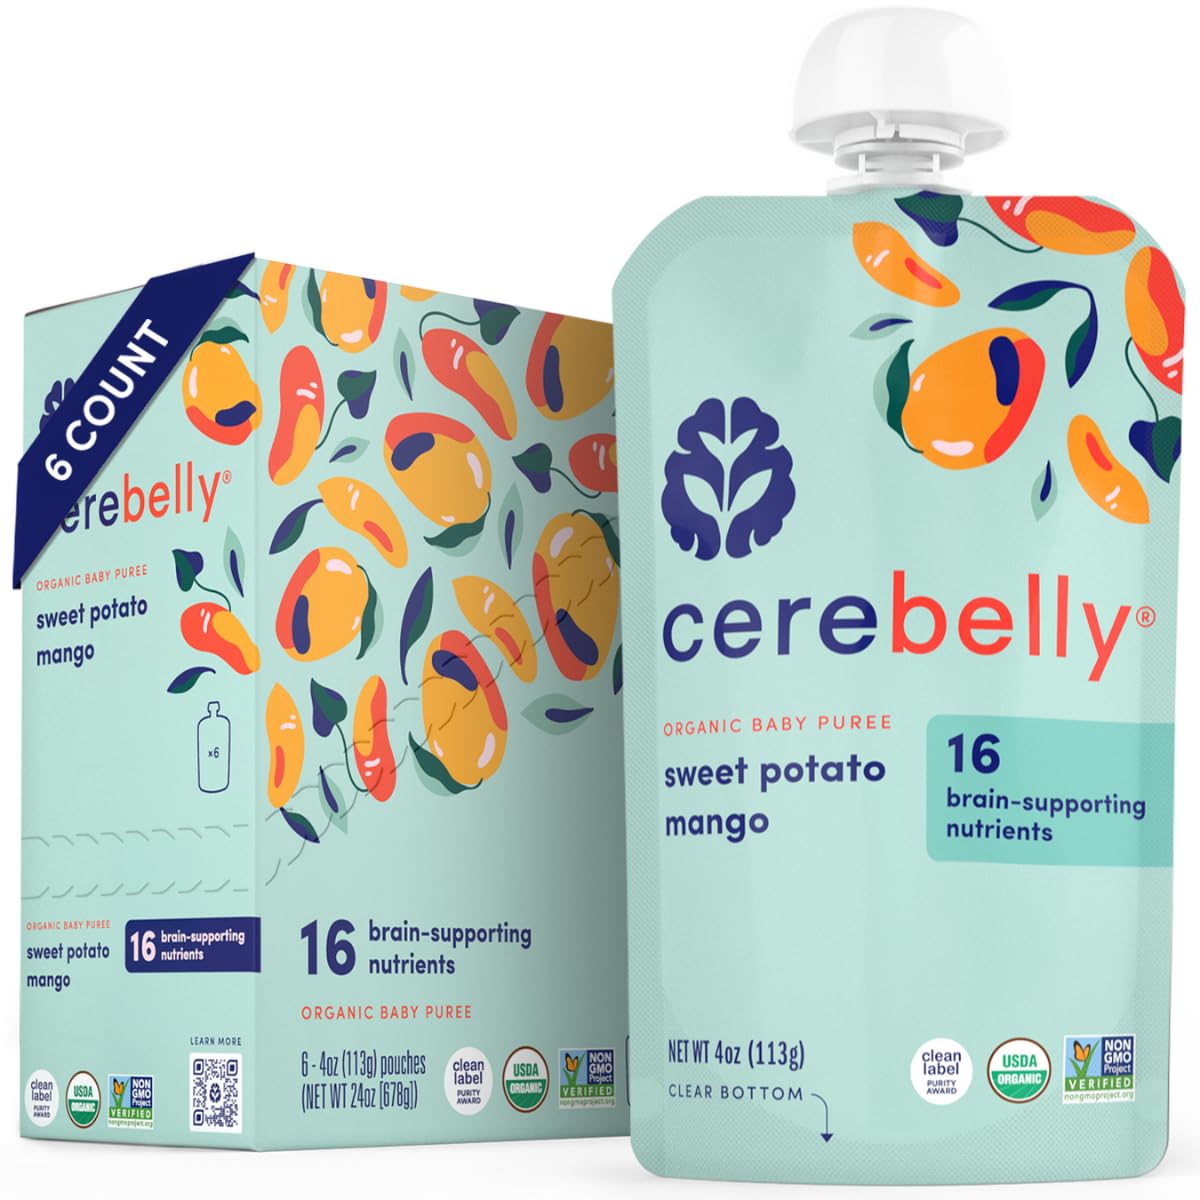 Cerebelly Baby Food Pouches – Organic Sweet Potato Mango (4 oz, Pack of 6) - Toddler Snacks - 16 Brain-Supporting Nutrients - Healthy Snacks, Made with Gluten-Free Ingredients, Non-GMO, No Added Sugar